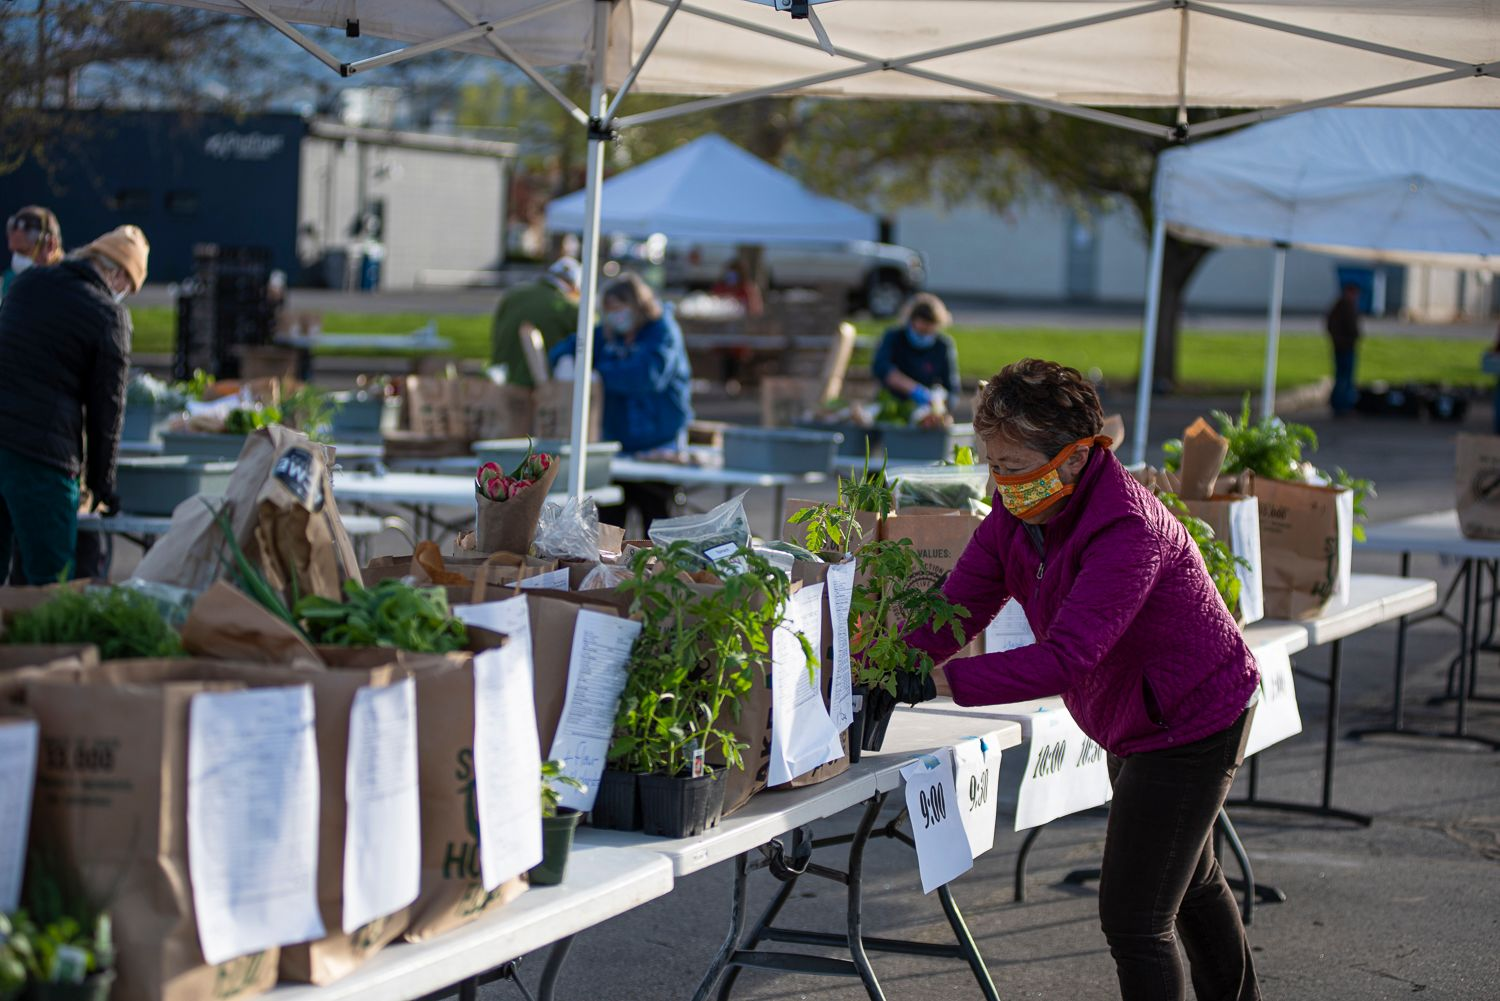 Making Markets Work: How the pandemic created a new customer base for the Boise Farmers Market